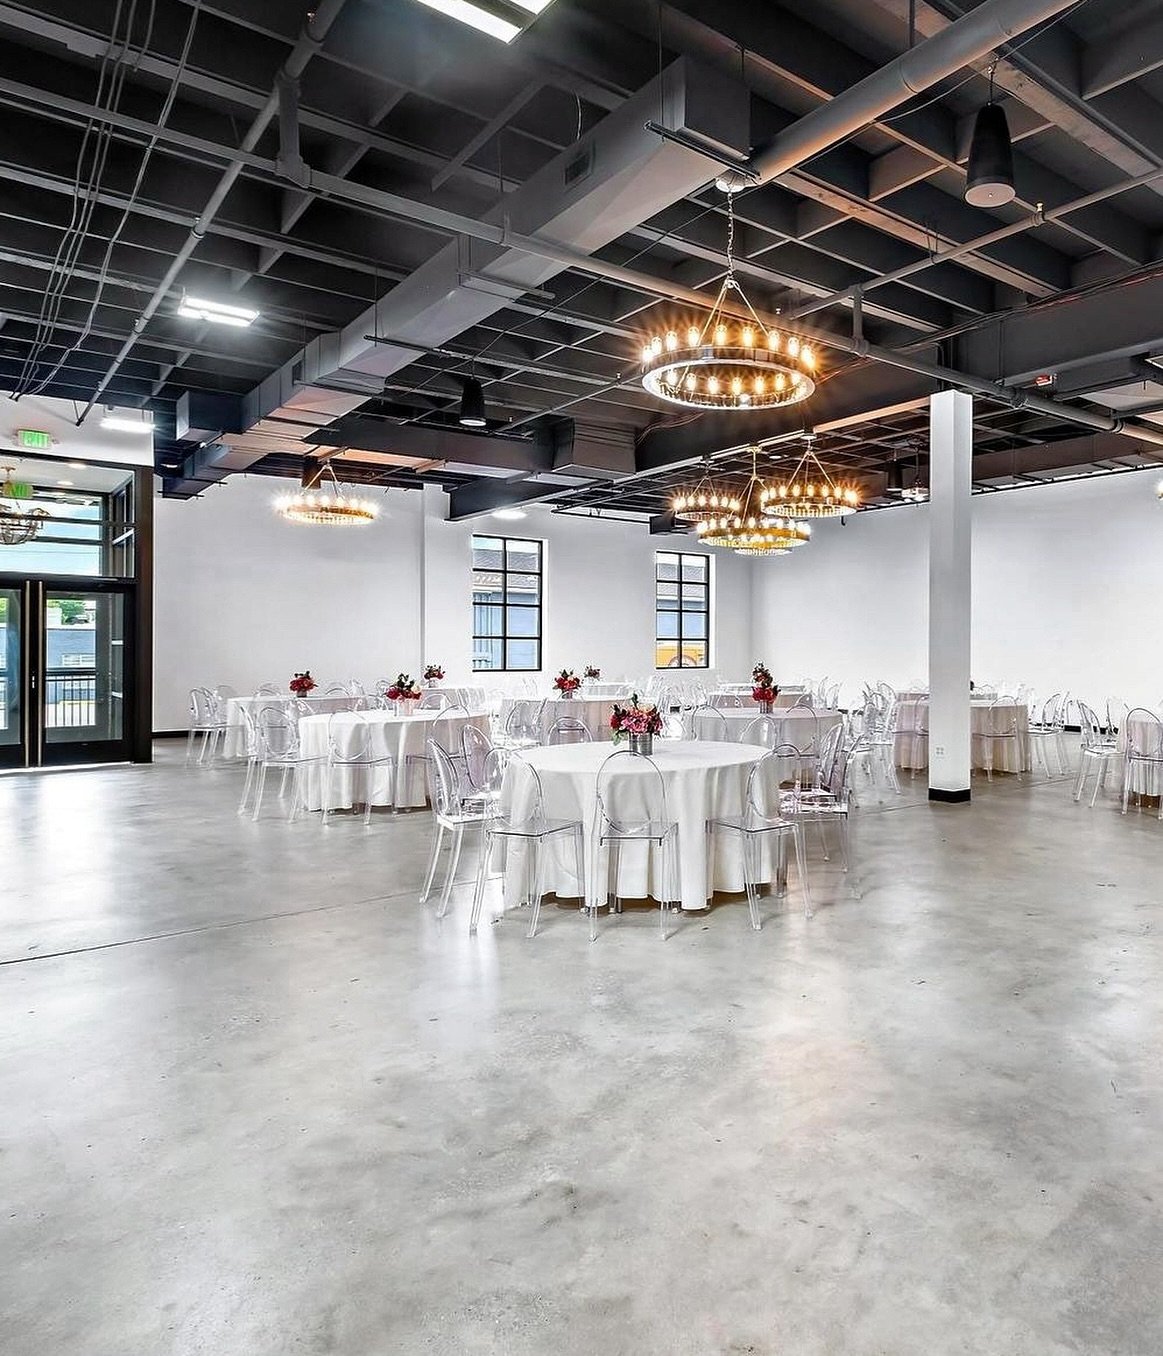 A perfect space for any celebration, event, or party you&rsquo;re looking to host! Find out more about Slate The Venue and all of our packages at www.slatethevenue.com today! 🎉🪩✨